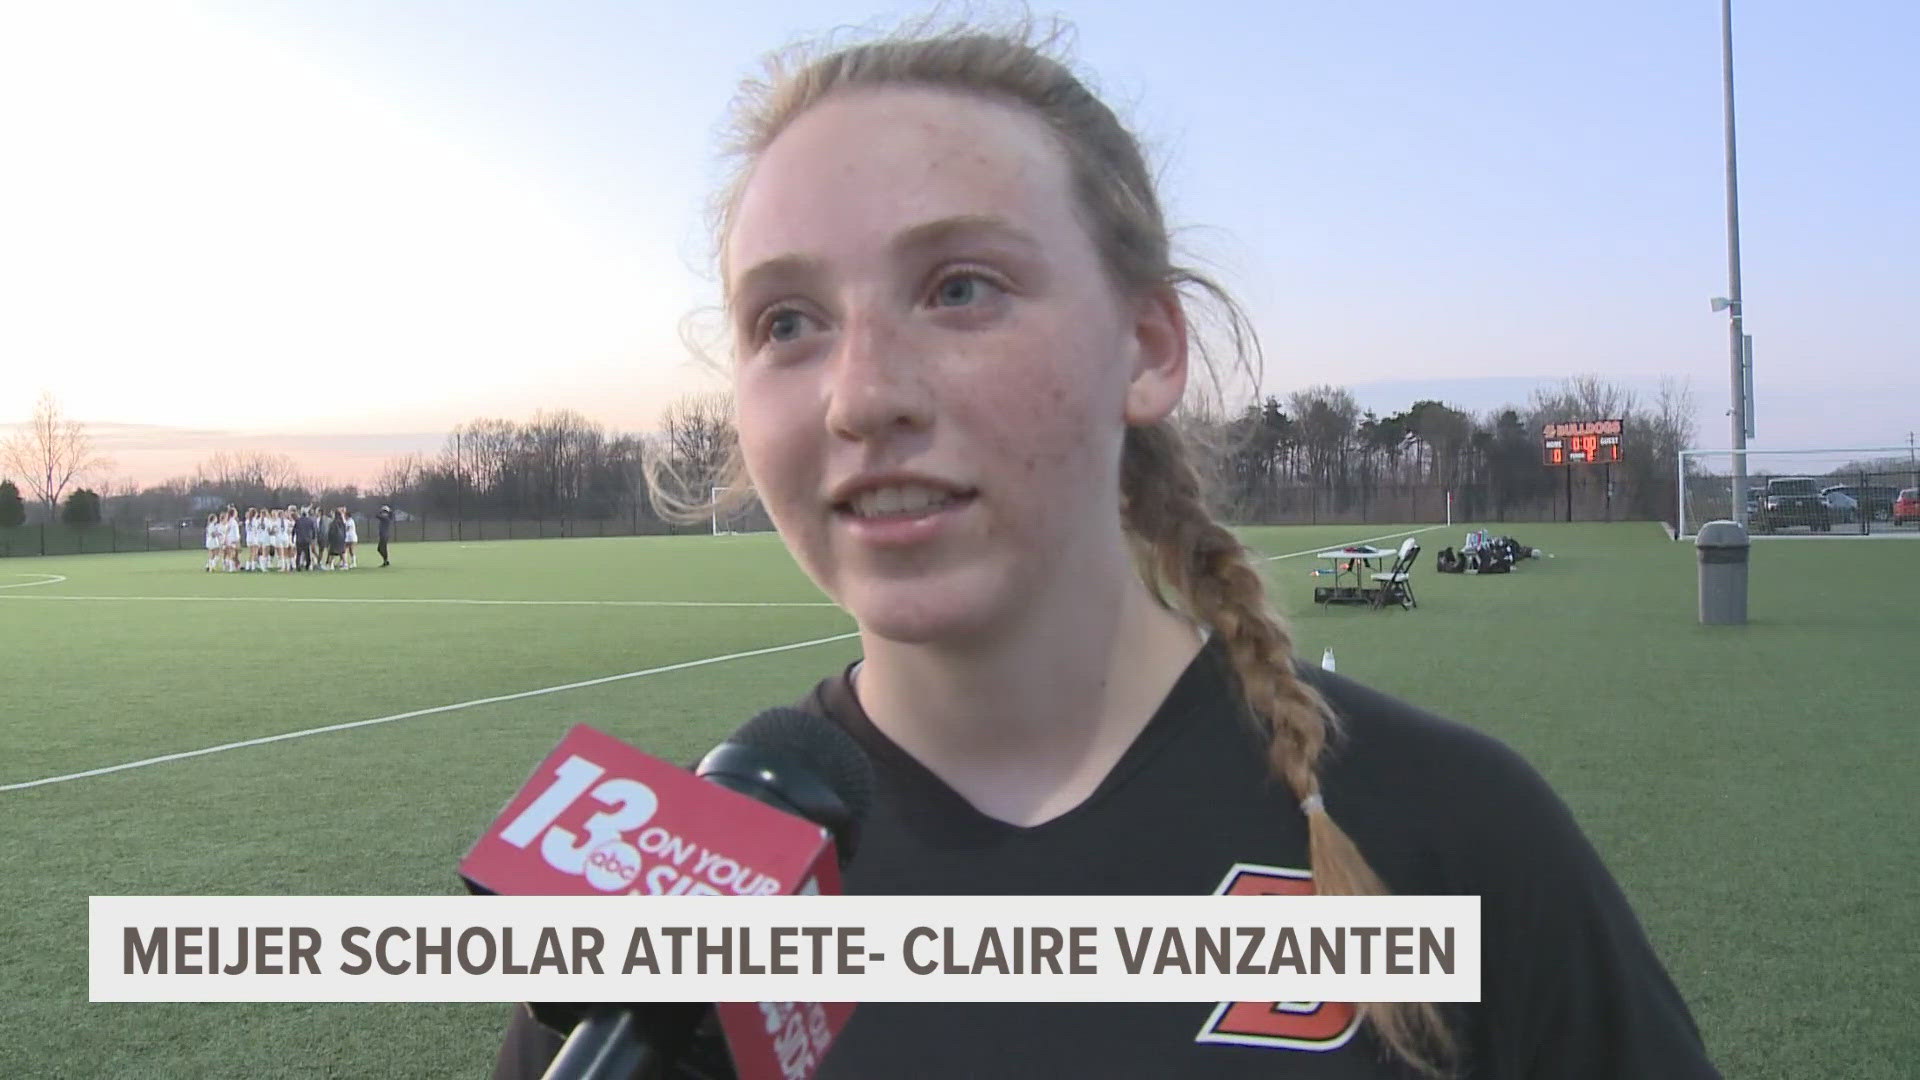 VanZanten is a top player for Byron Center's soccer team, along with being a stellar student.